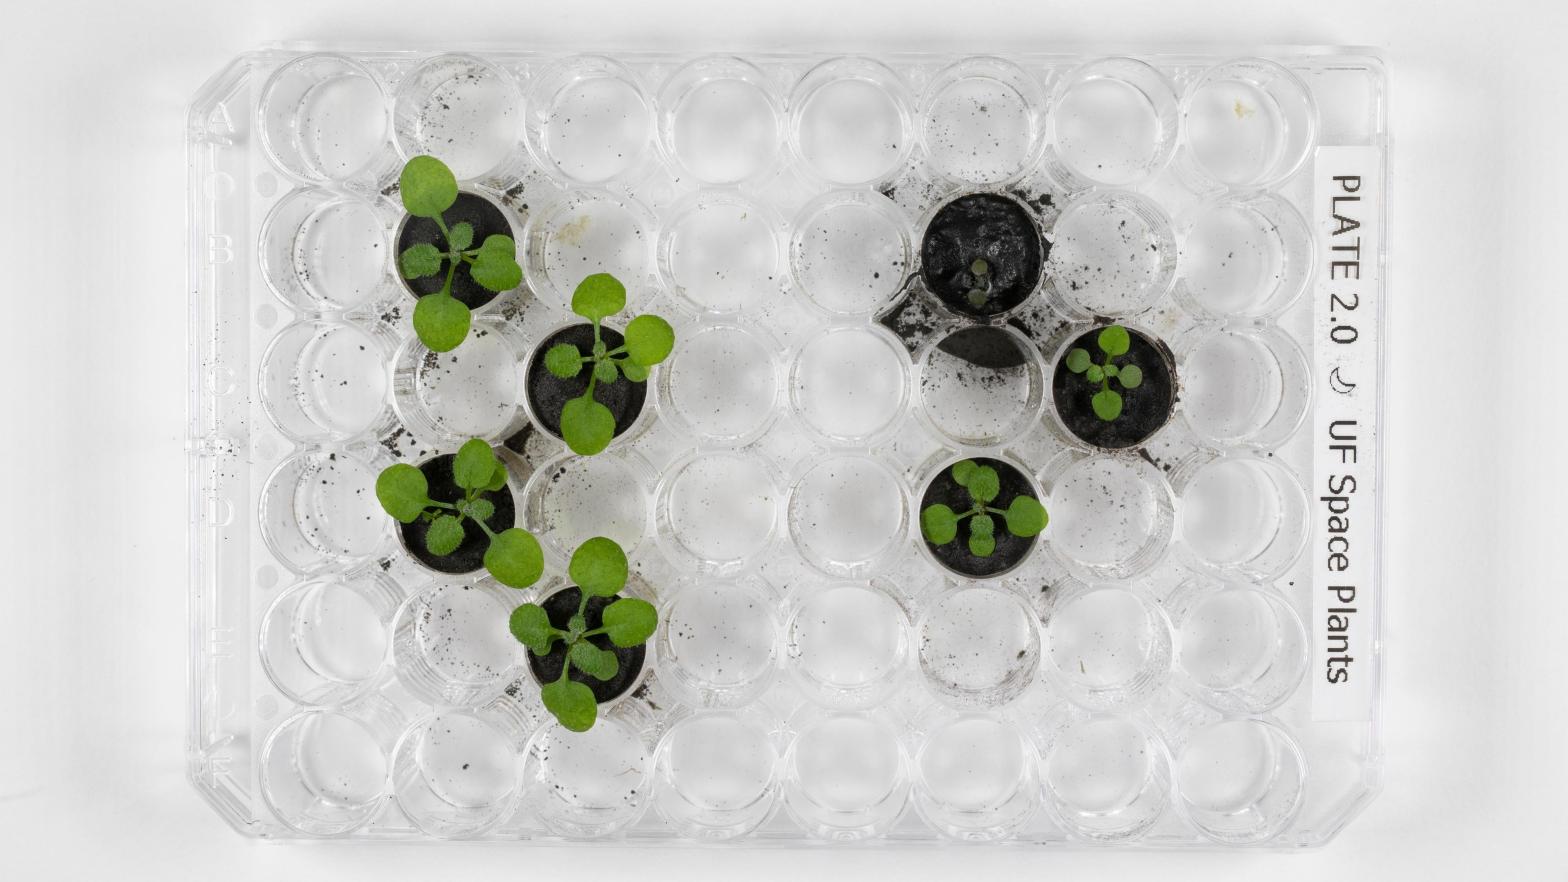 The plants after 16 days of growth, with clear differences seen between plants grown in simulated lunar soil (left) and plants grown in actual lunar regolith.  (Photo: Tyler Jones, UF/IFAS)